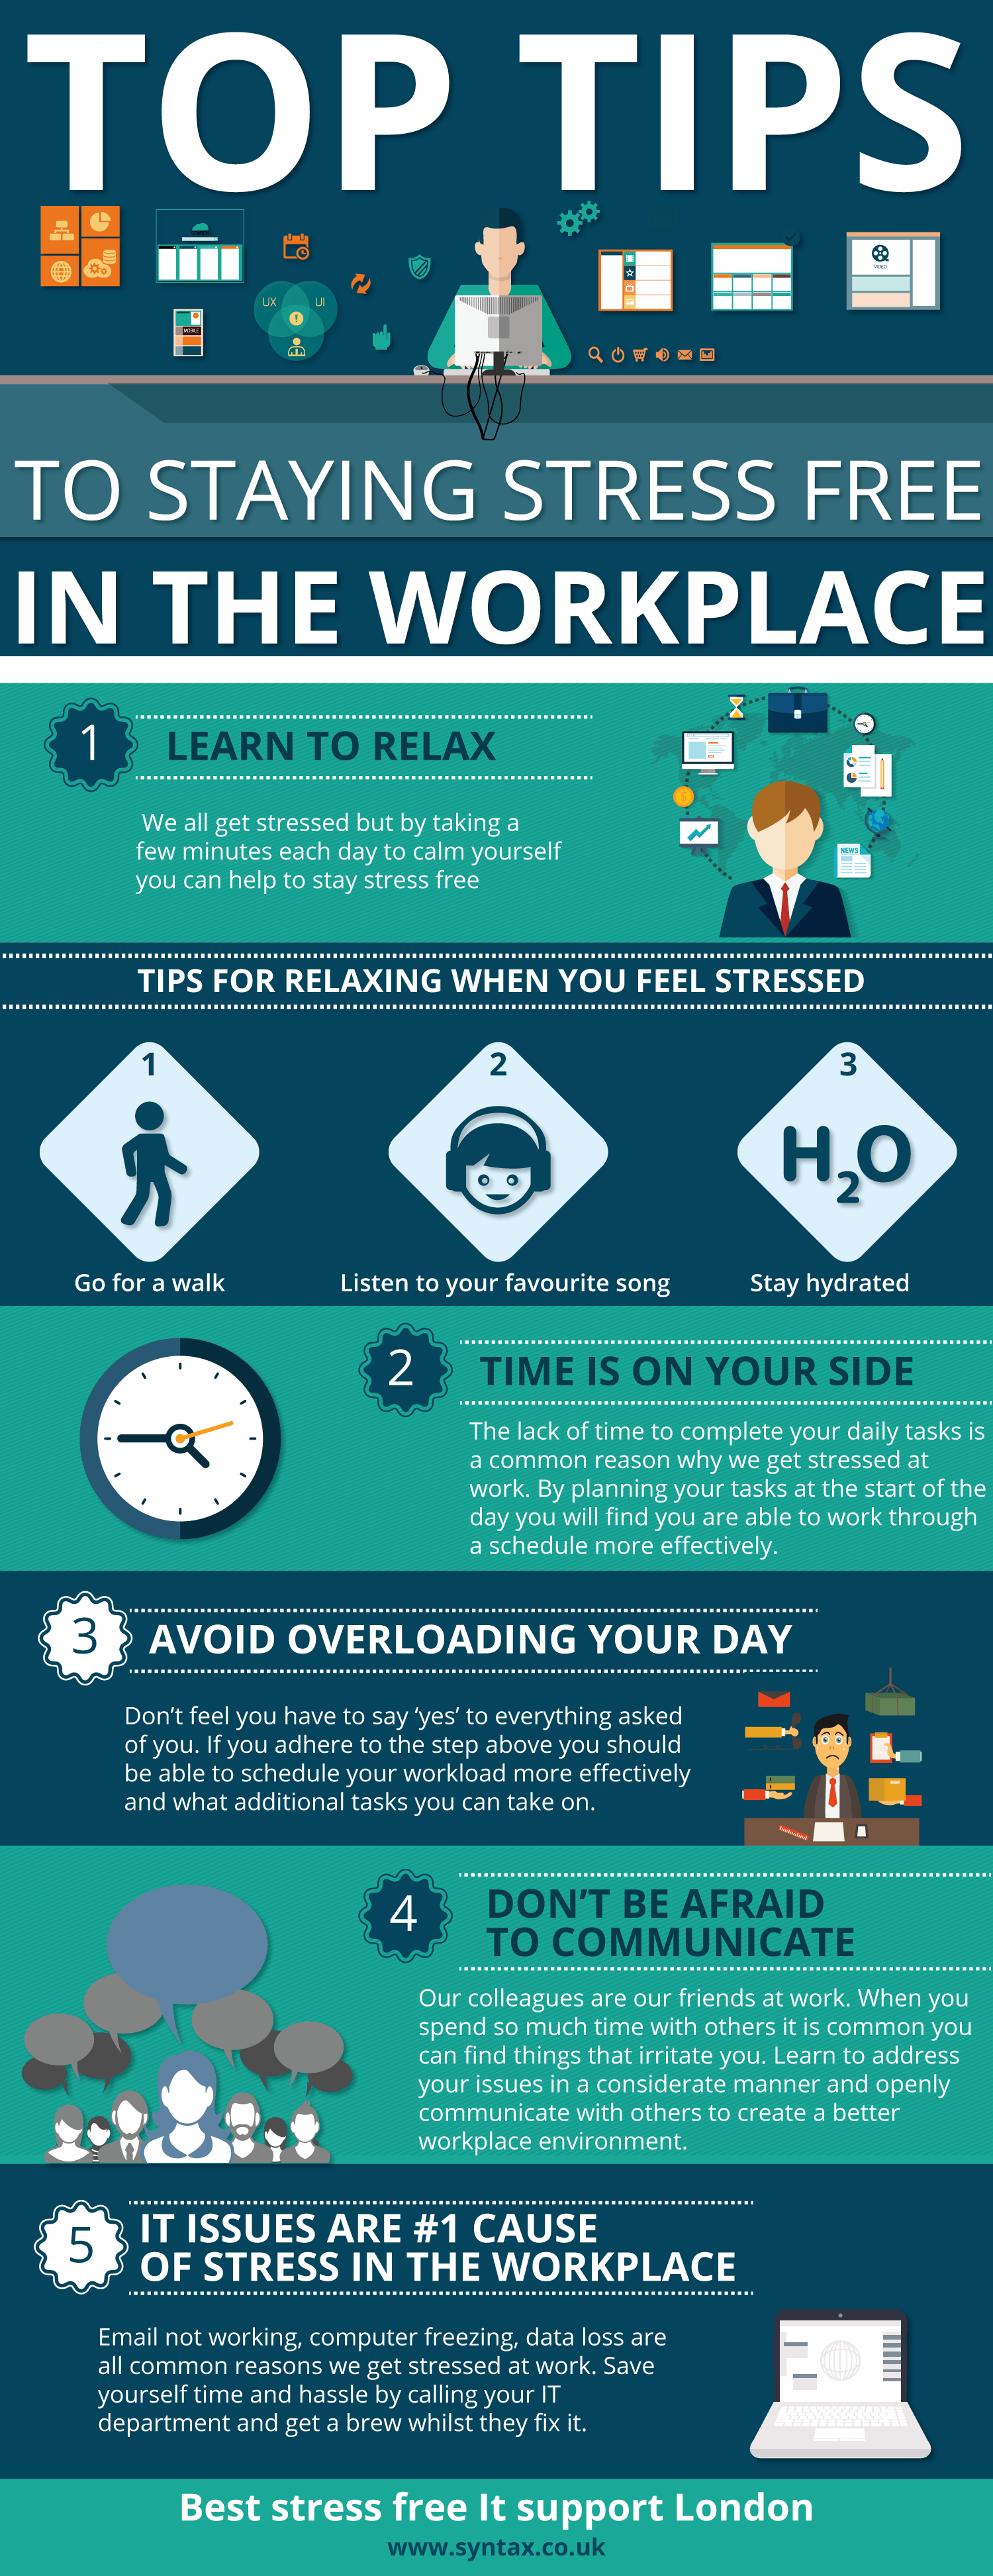 Top Tips To Staying Stress Free In The Workplace Infographic - e